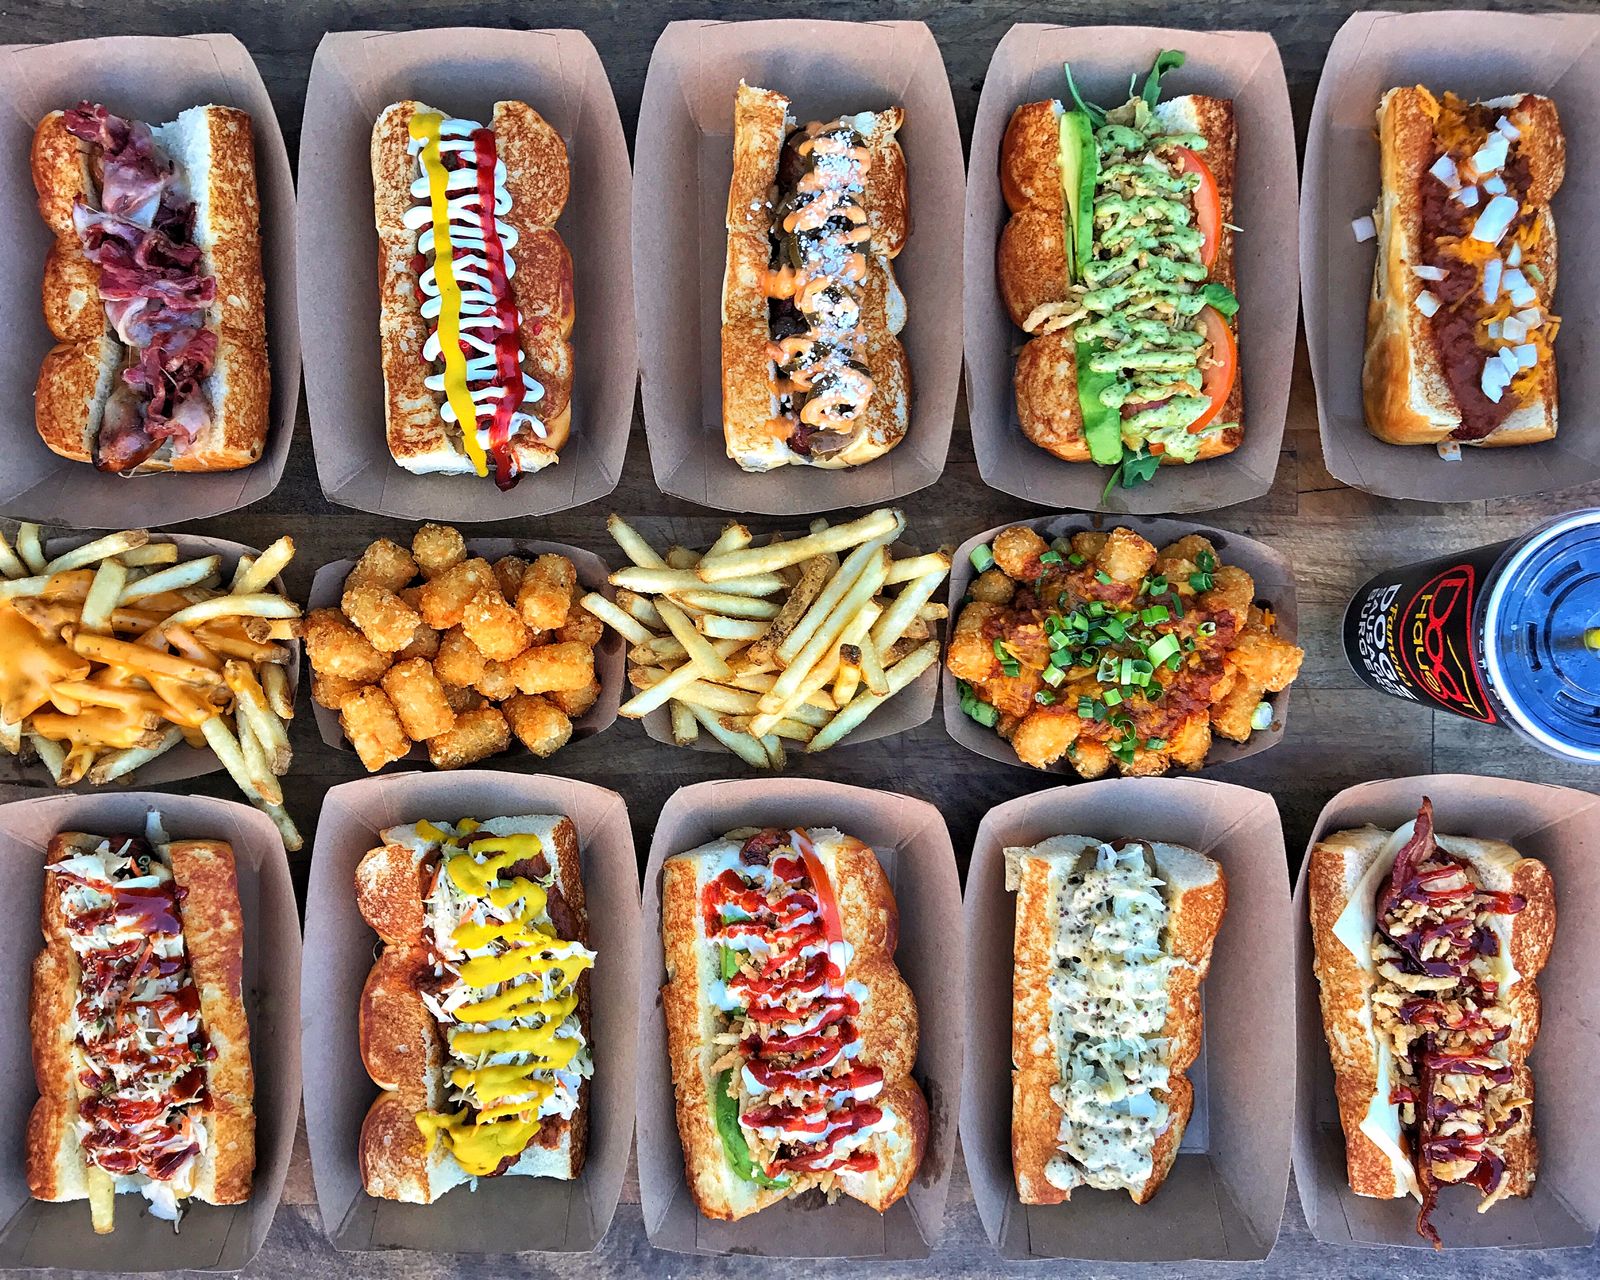 Dog Haus Maps Out East Bay Expansion with Six-Location Franchise Agreement